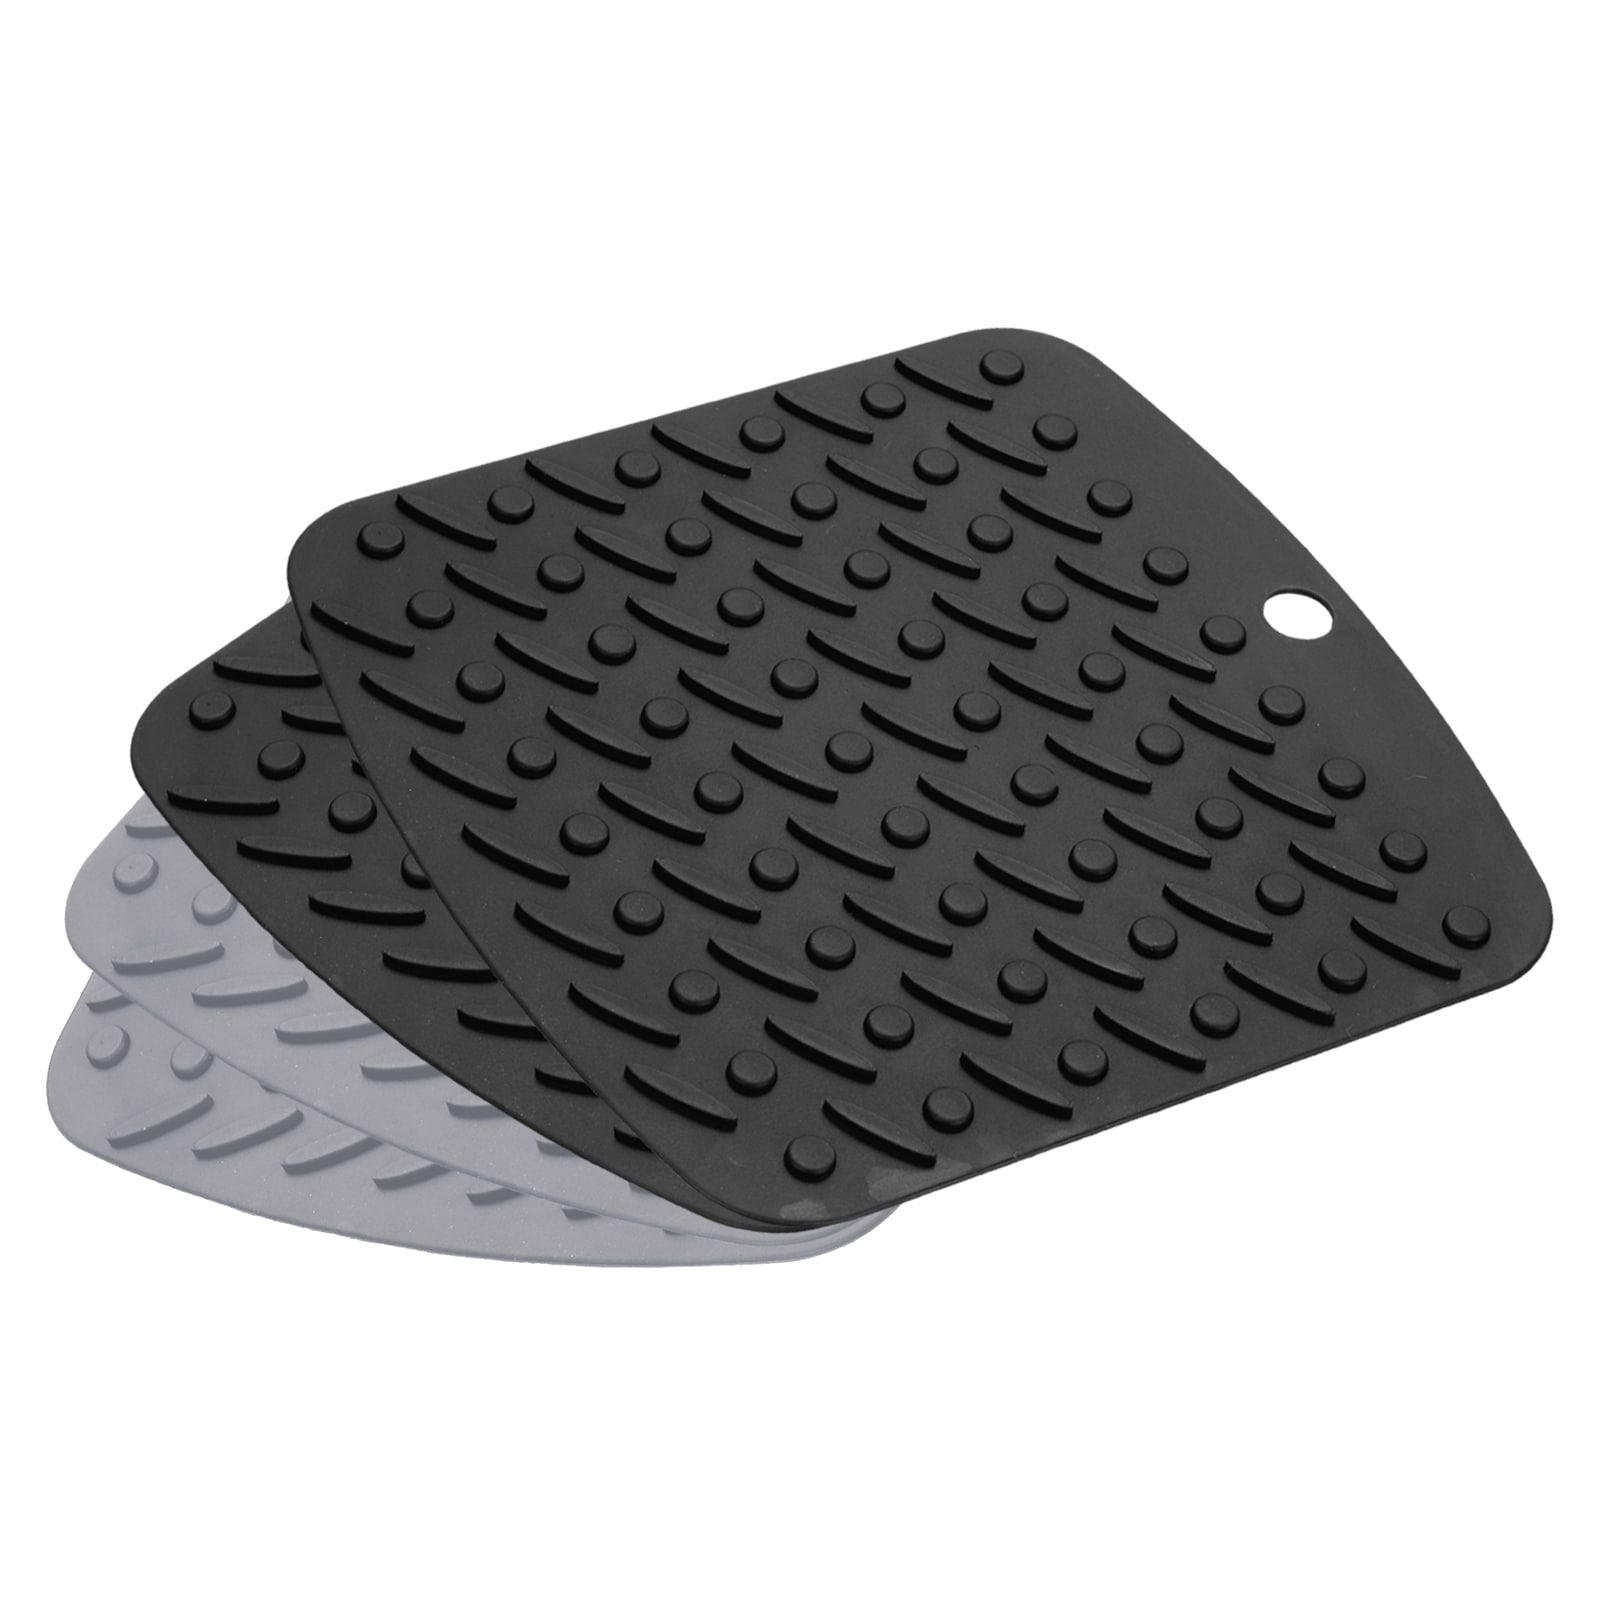 Table Mats Silicone Mat Heat Resistant Sheet Waterproof Pad